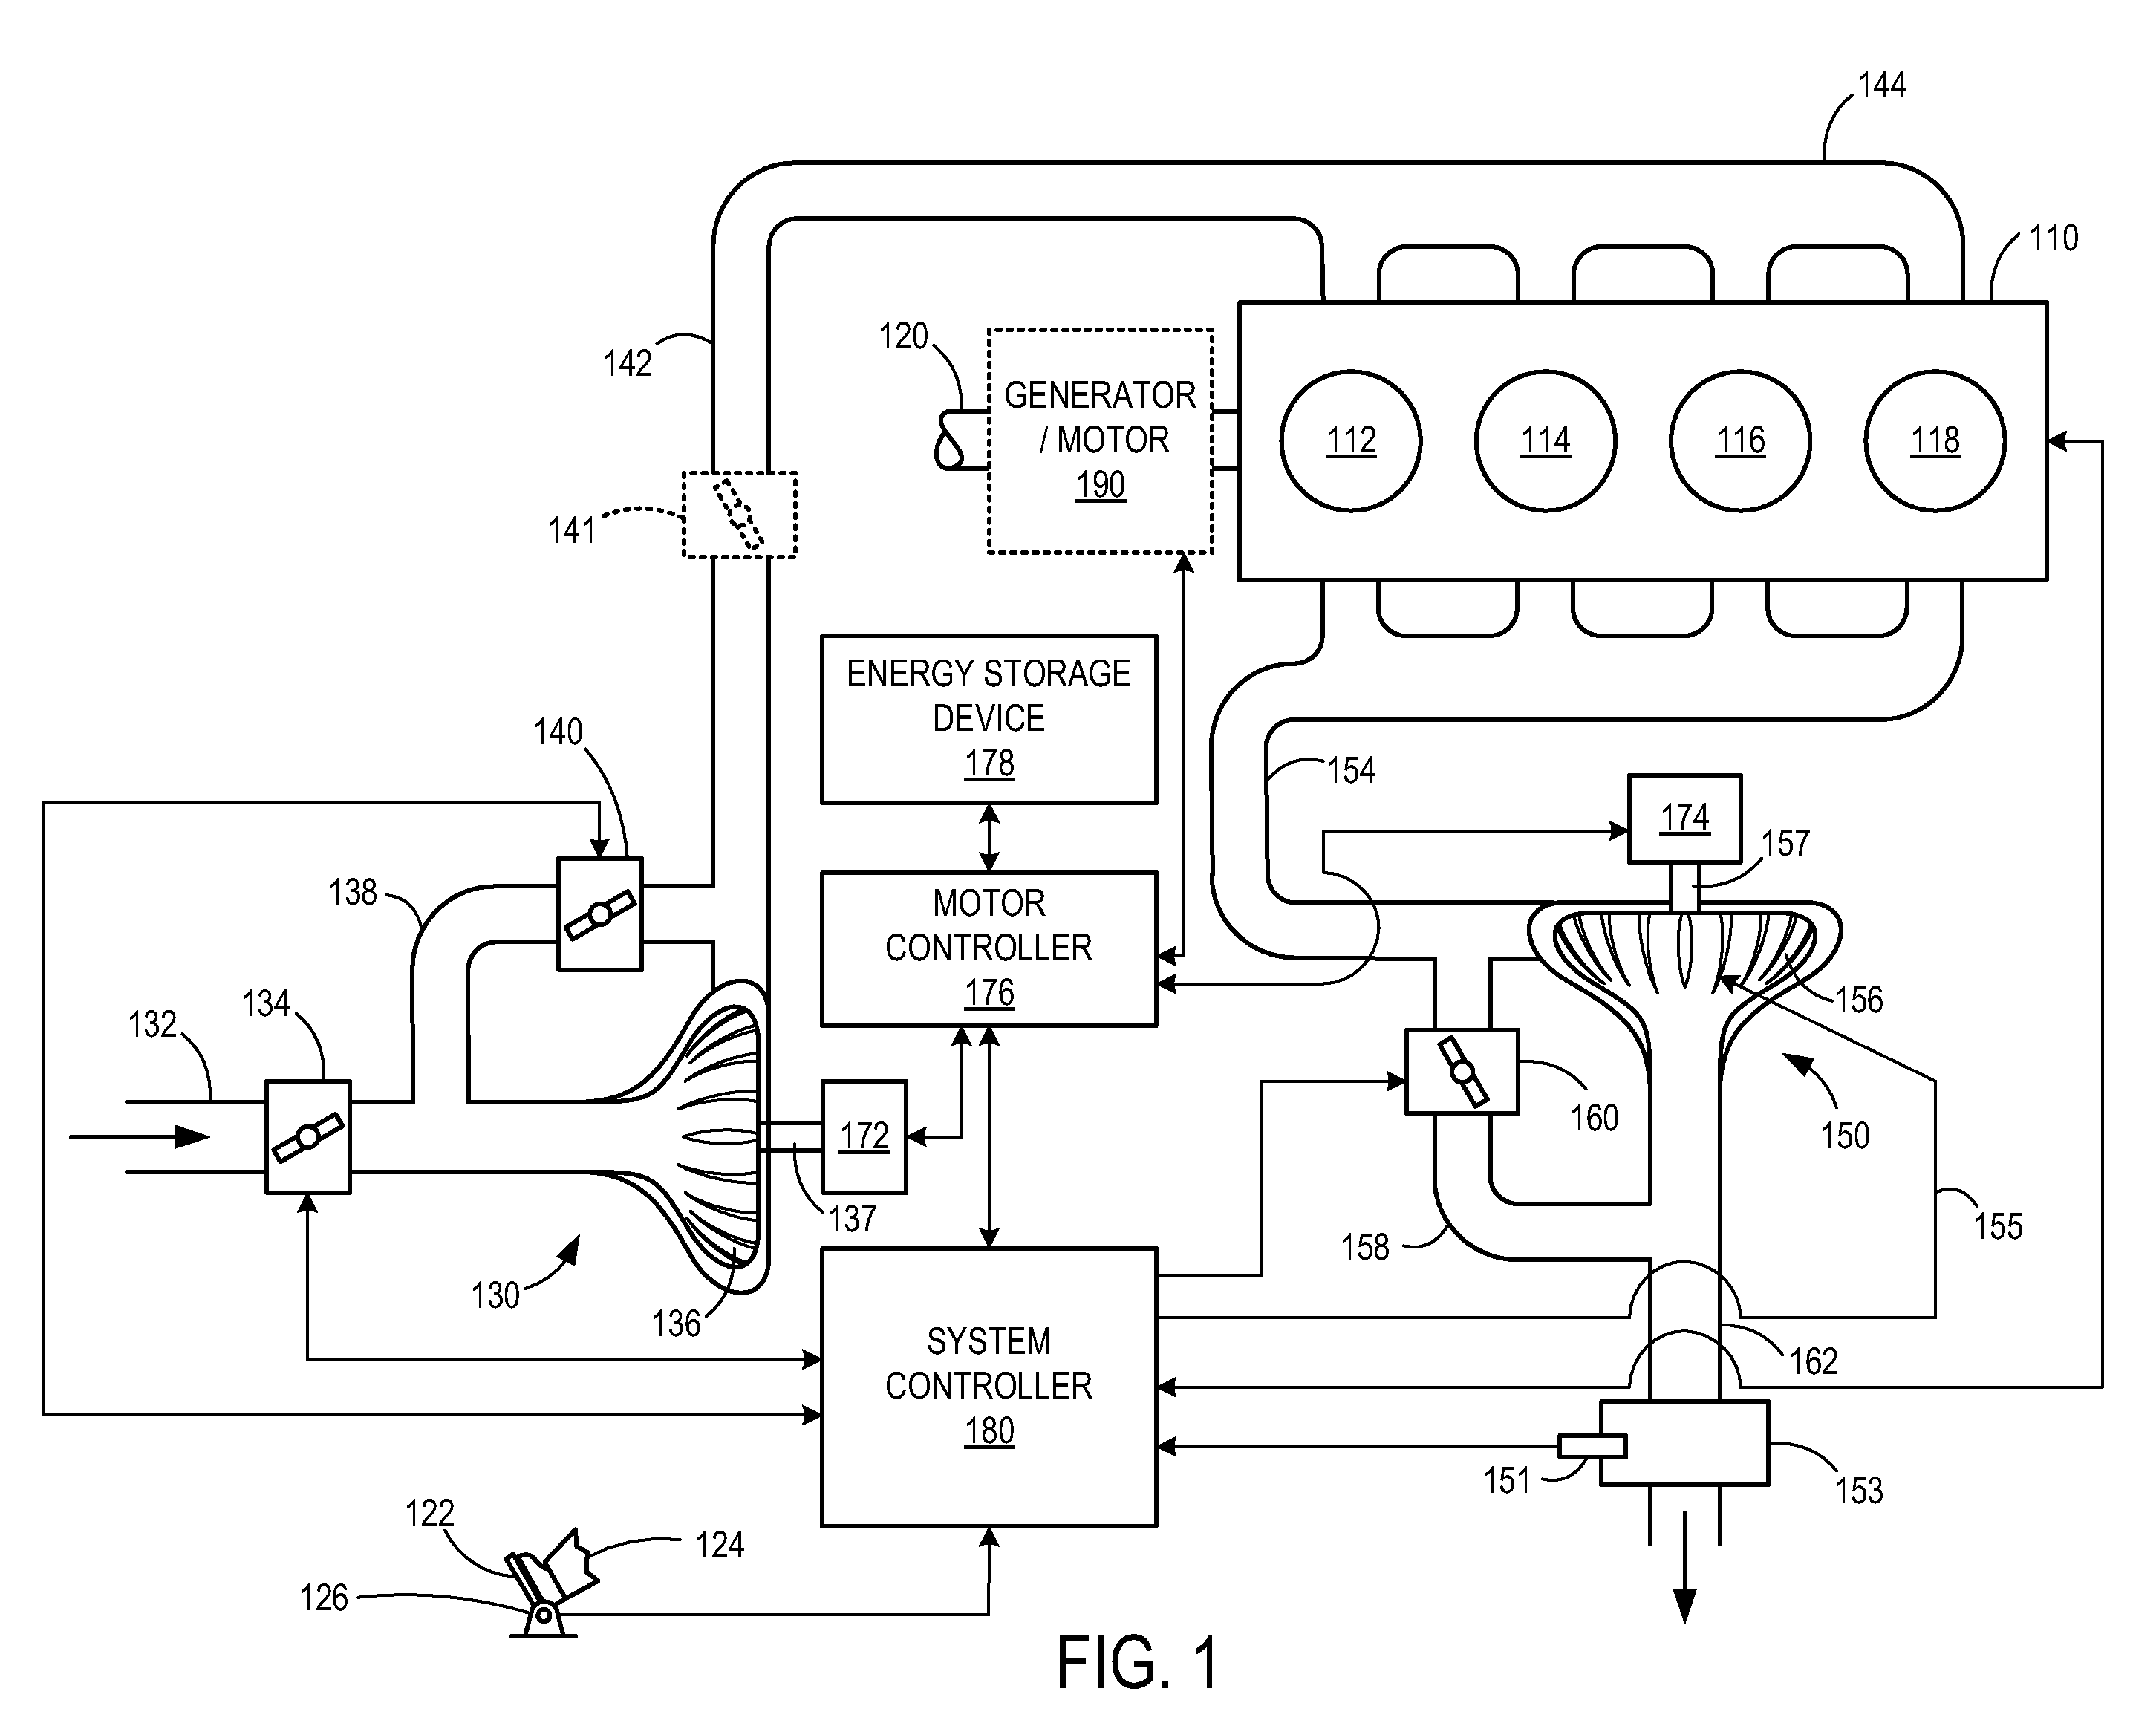 Compression System for Internal Combustion Engine Including a Rotationally Uncoupled Exhaust Gas Turbine